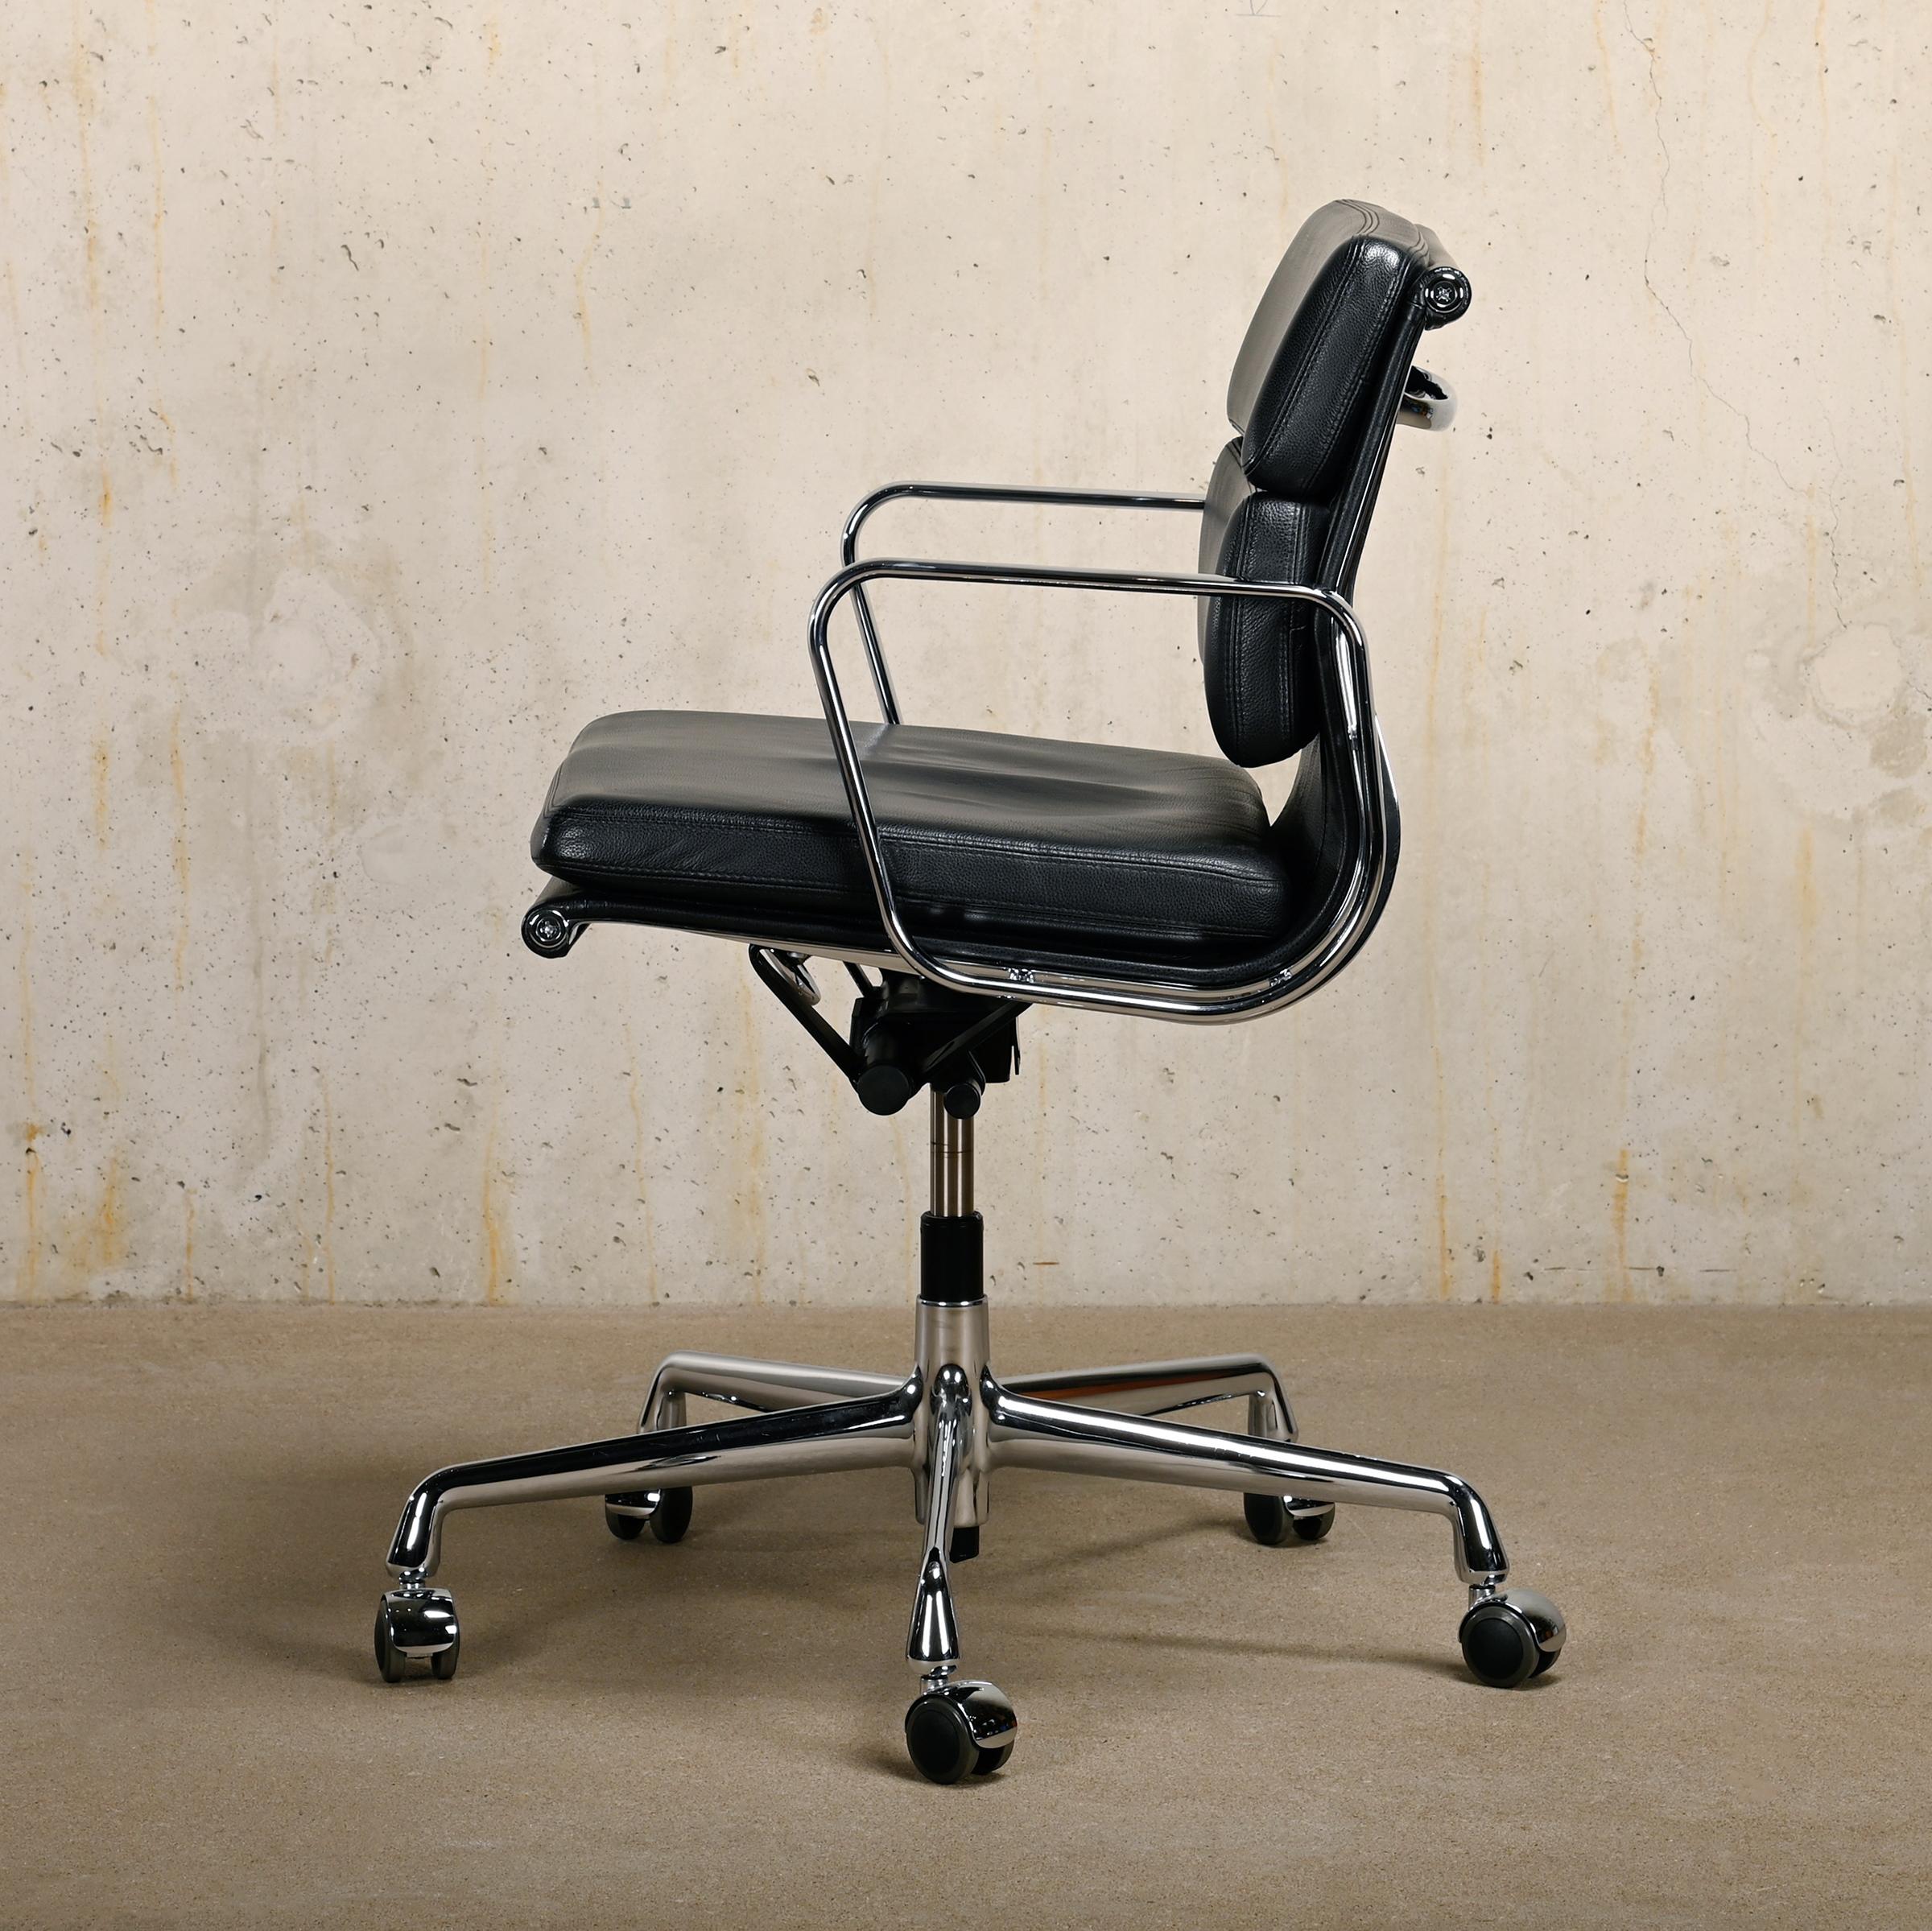 Beautiful office chair EA217 belonging to the iconic Aluminium Series designed by Charles & Ray Eames for Herman Miller (US) / Vitra (EU). Exceptional comfort is guaranteed with the cushions in soft leather, height adjustment and tilt/swivel